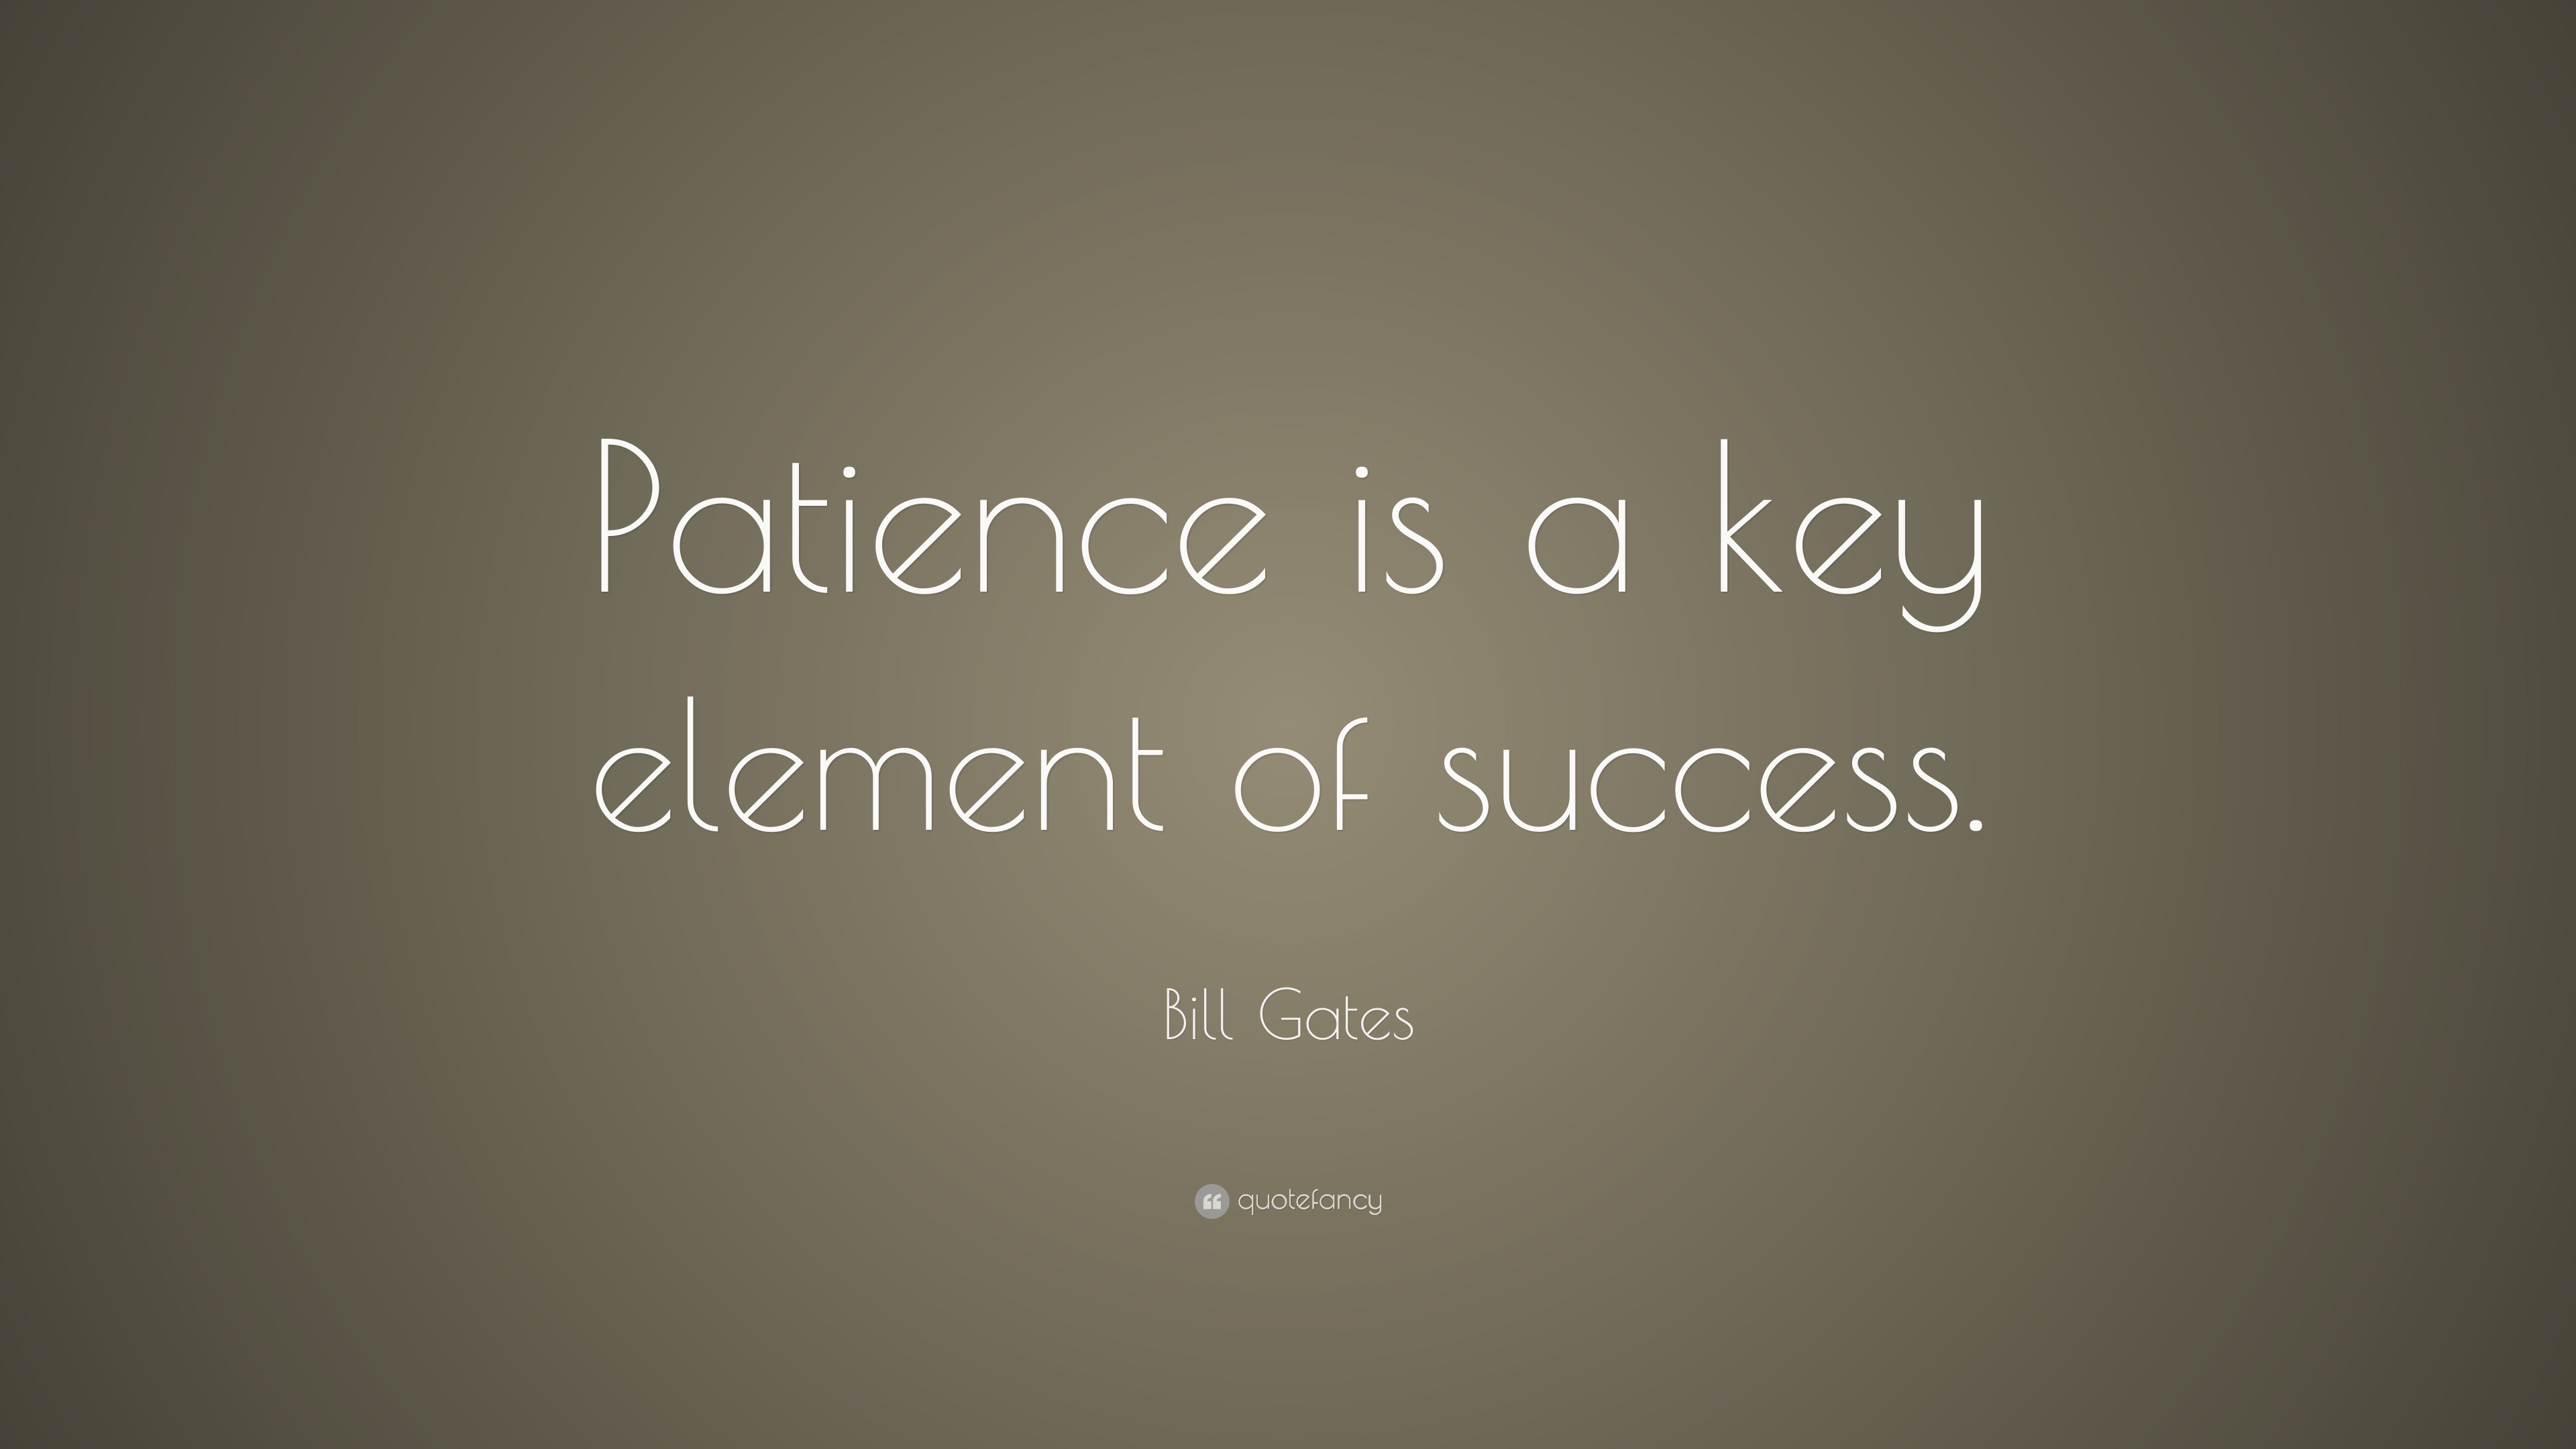 Bill Gates Quote “Patience is a key element of success ”